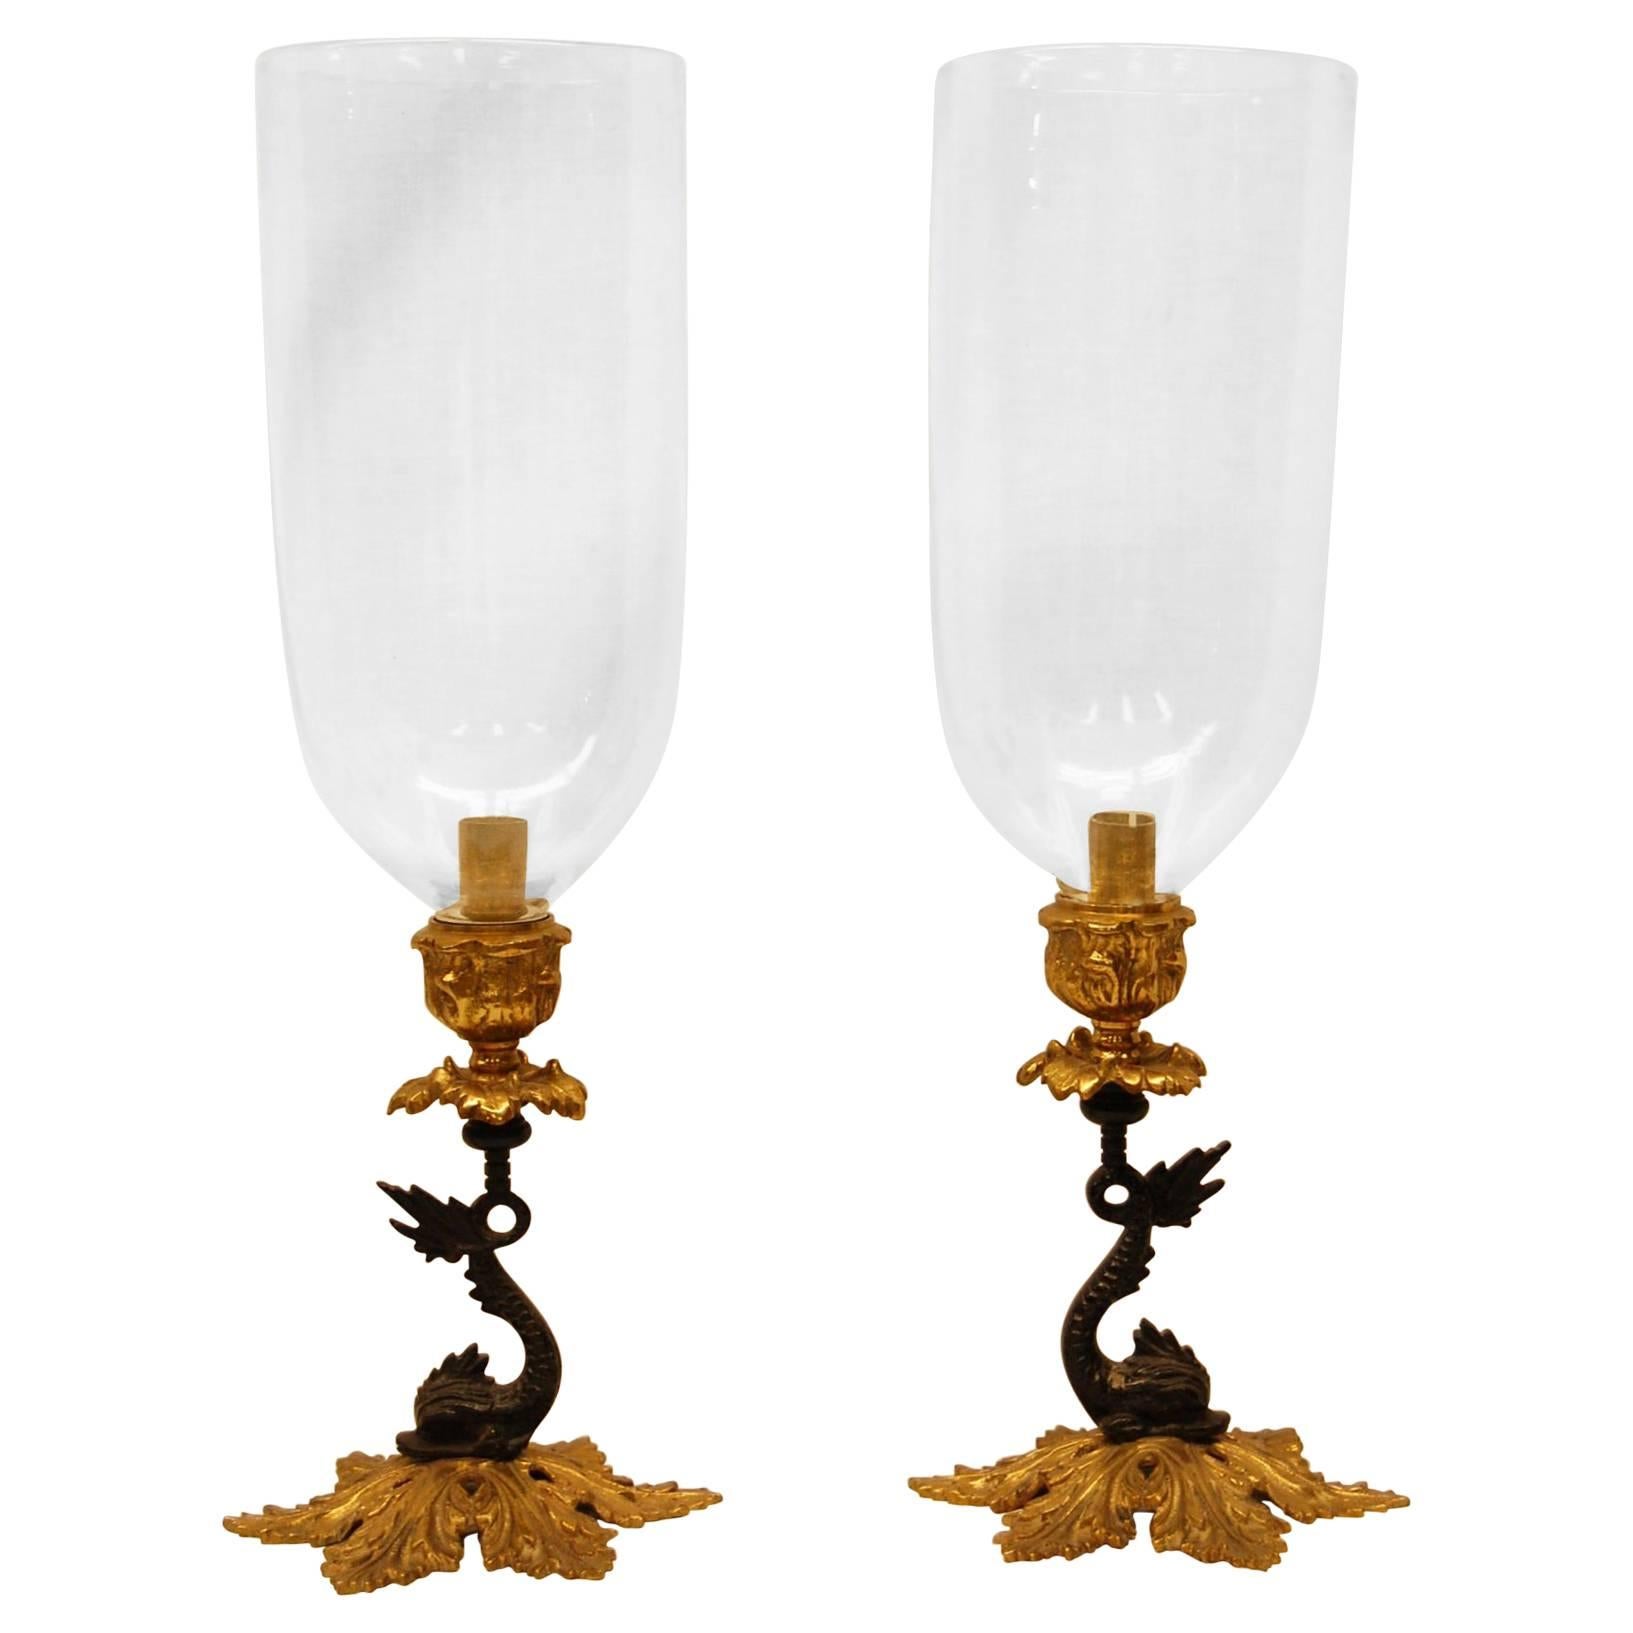 Pair of Reproduction Brass Candlesticks with Glass Hurricanes on Dolphin Bases